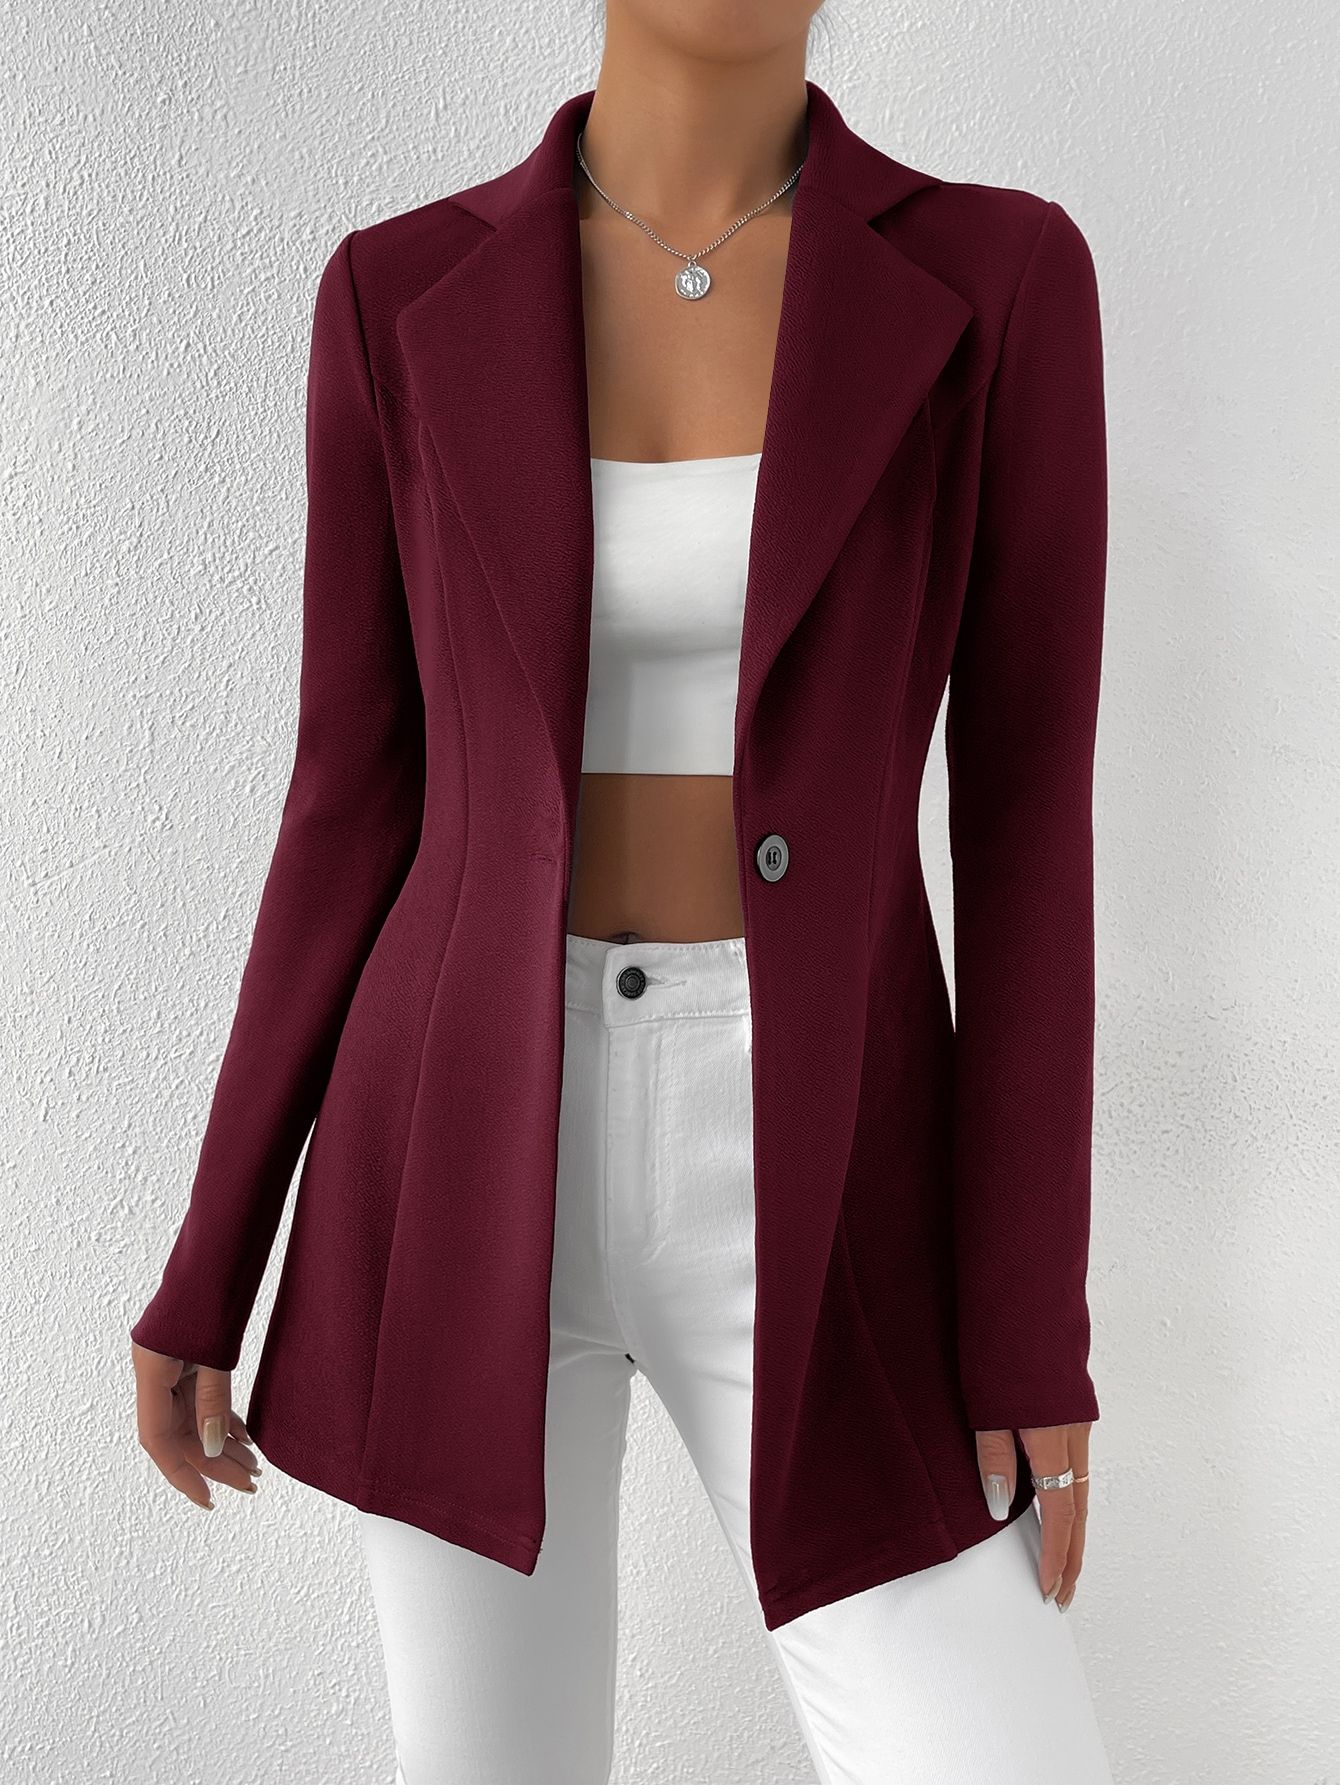 Sophisticated Style: Elevating Your Look with Maroon Blazers